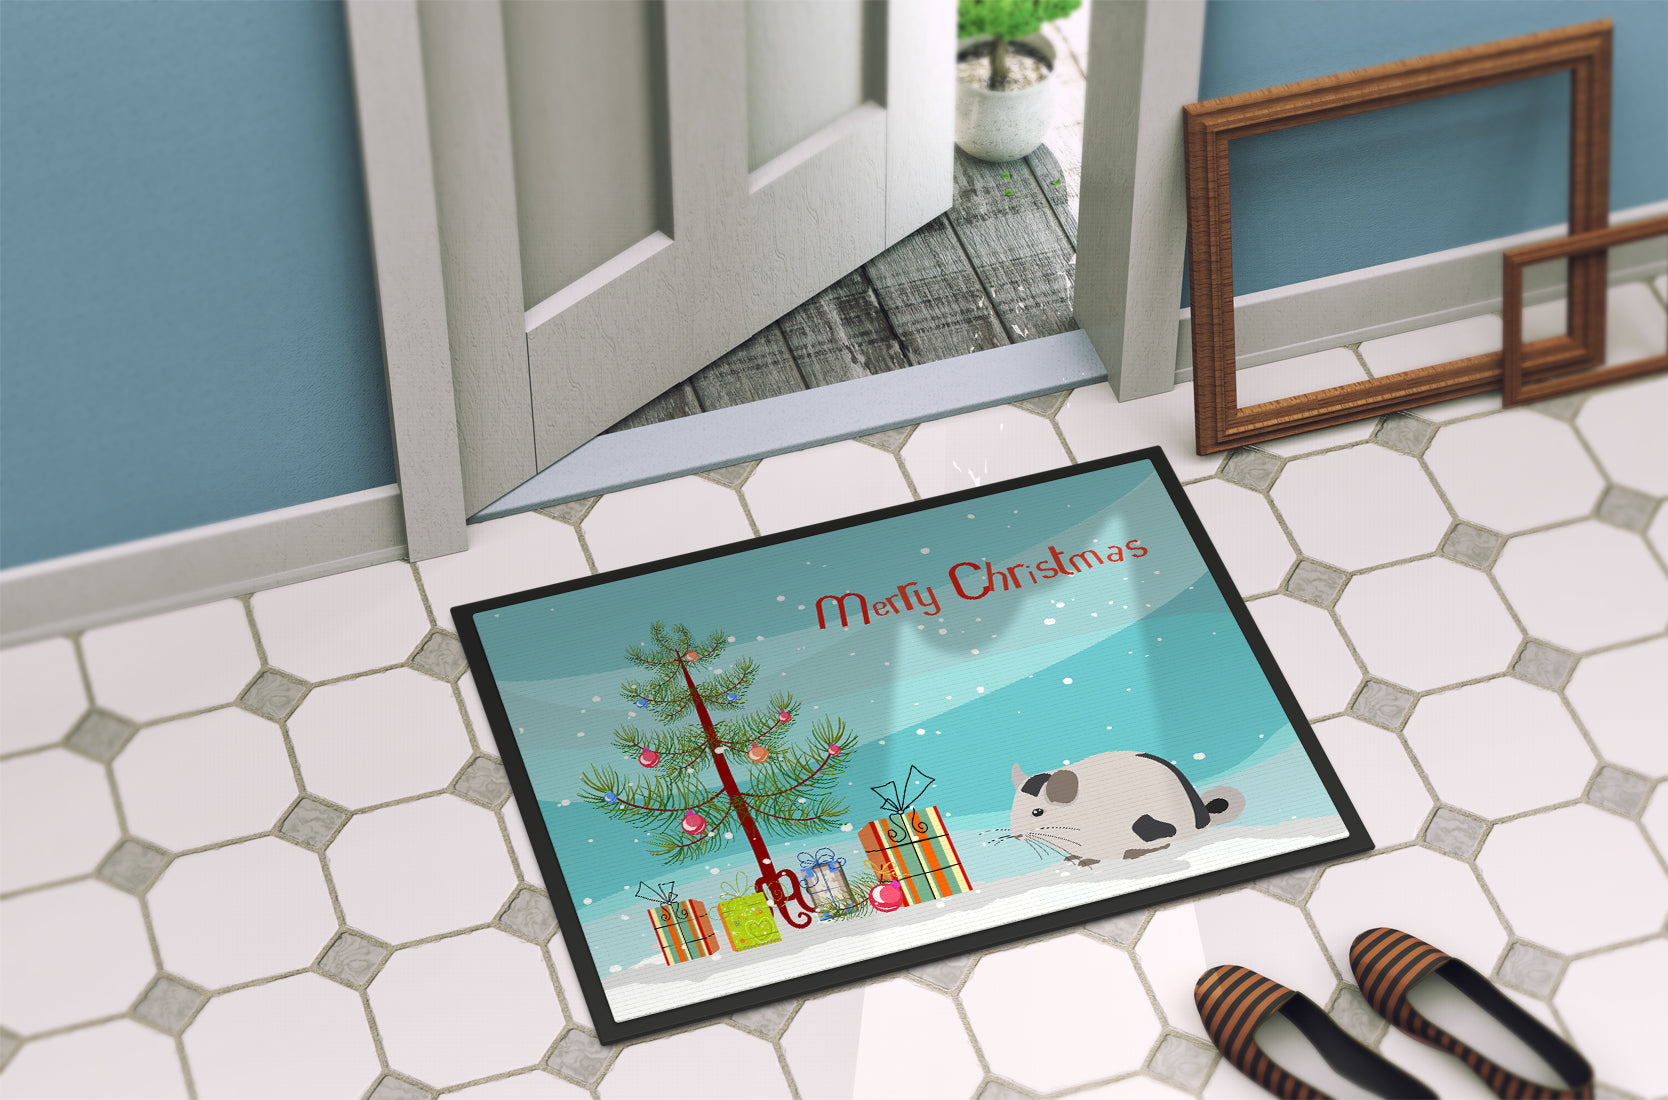 Mosaic Chinchilla Merry Christmas Indoor or Outdoor Mat 18x27 CK4435MAT - the-store.com